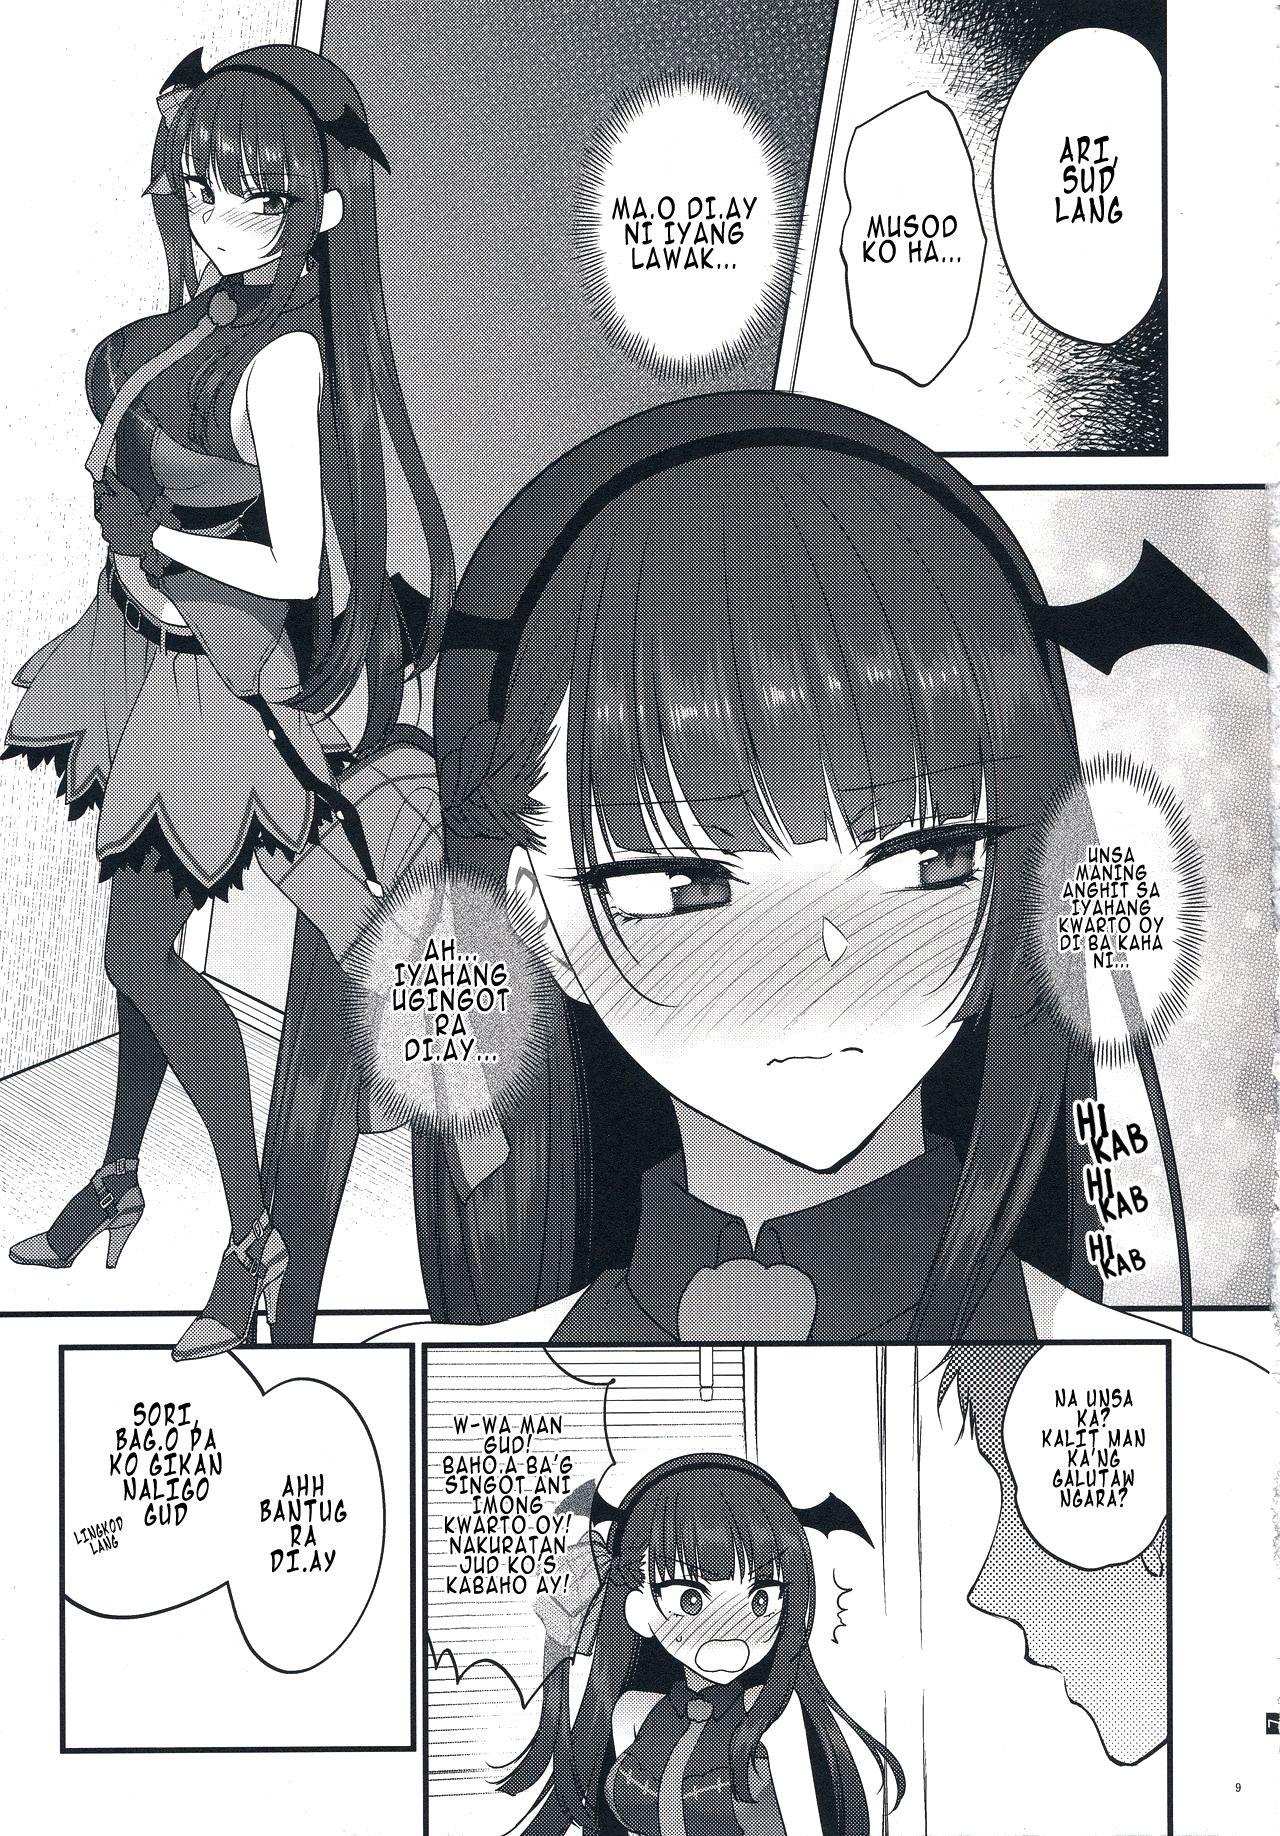 Her Obake nante Inai! - Girls frontline Pierced - Page 9